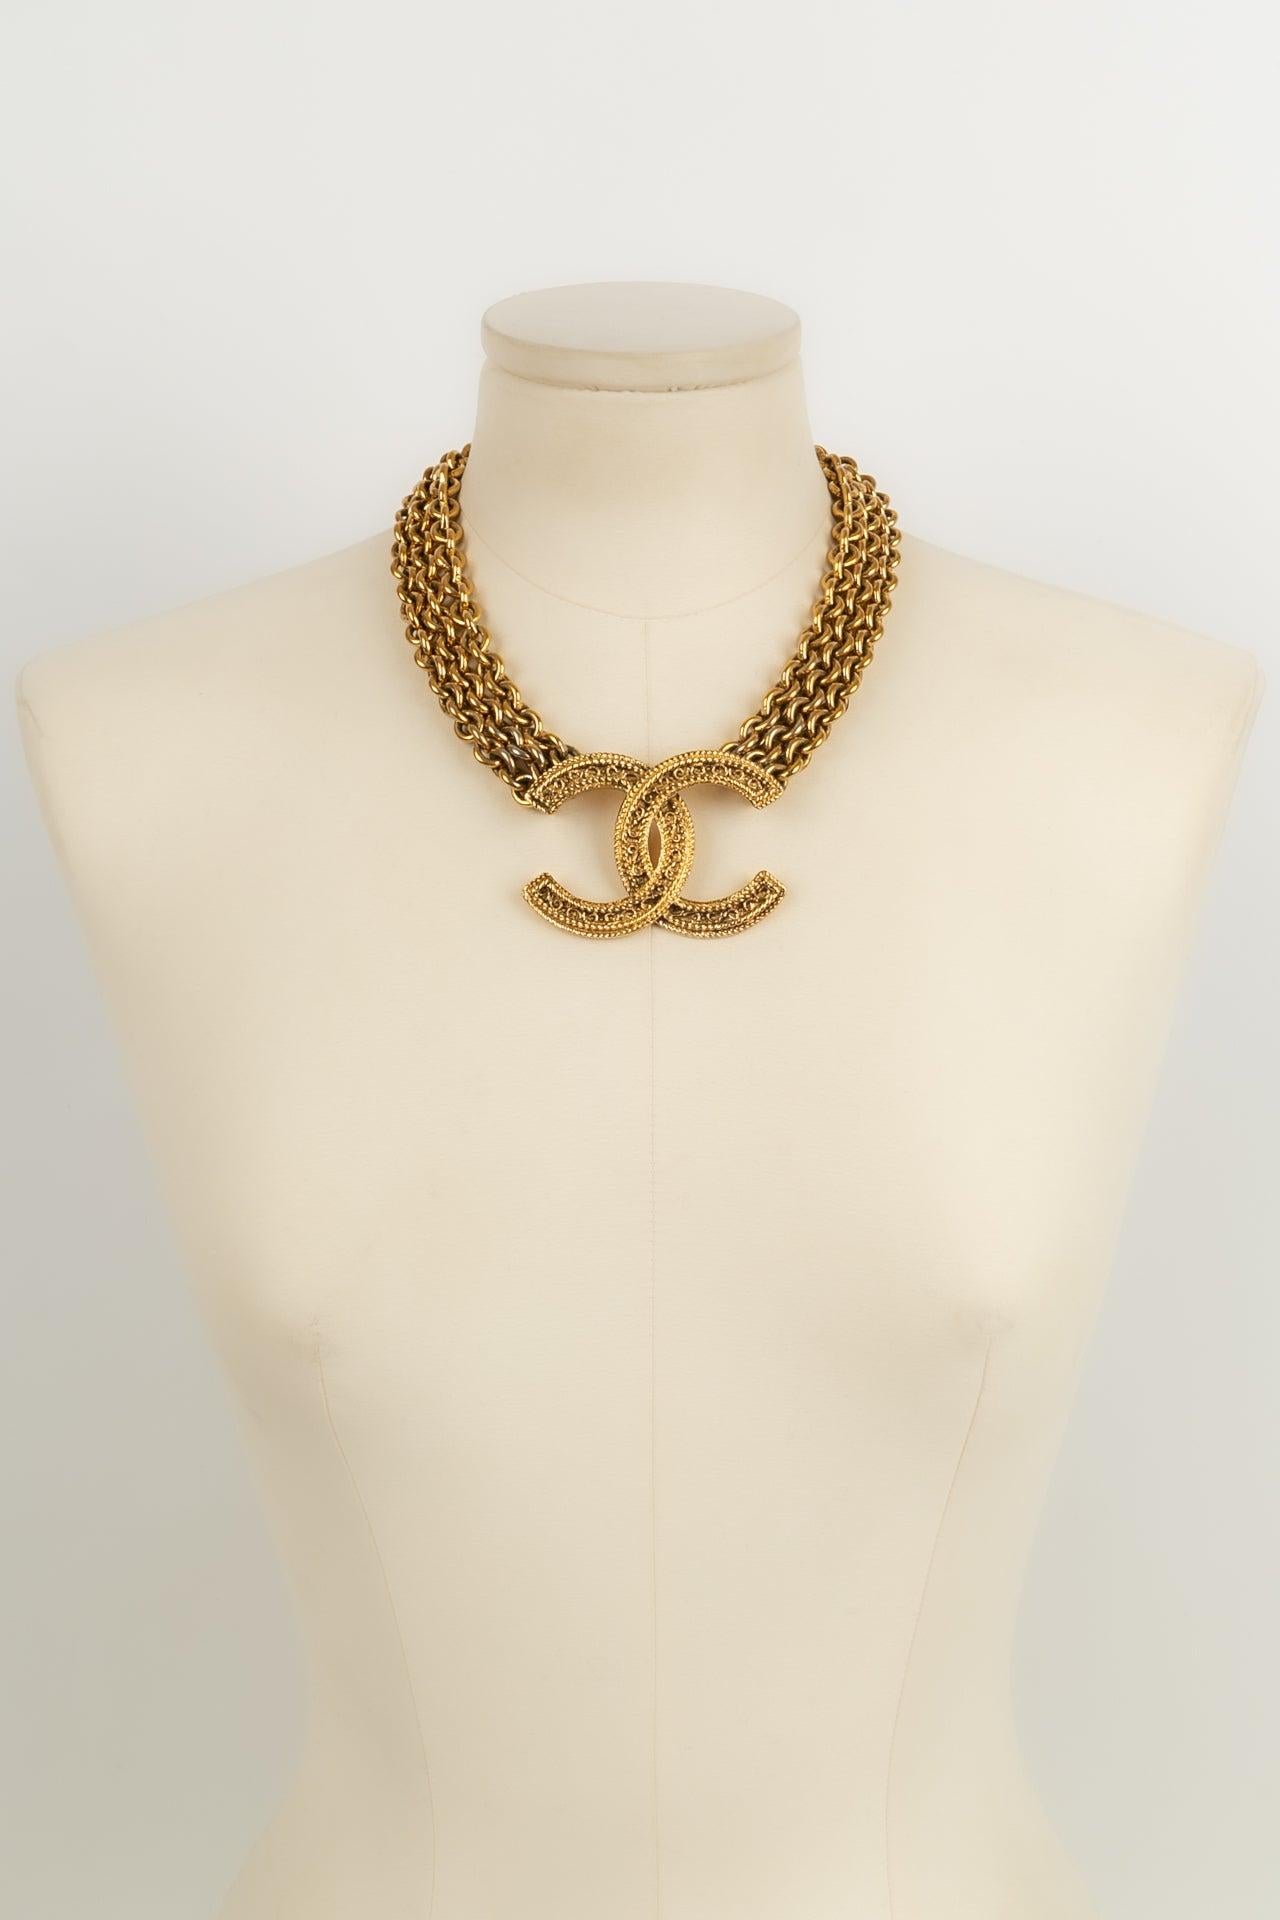 Chanel Necklace in Three Gold Metal Chains with Central CC Pendant In Excellent Condition For Sale In SAINT-OUEN-SUR-SEINE, FR